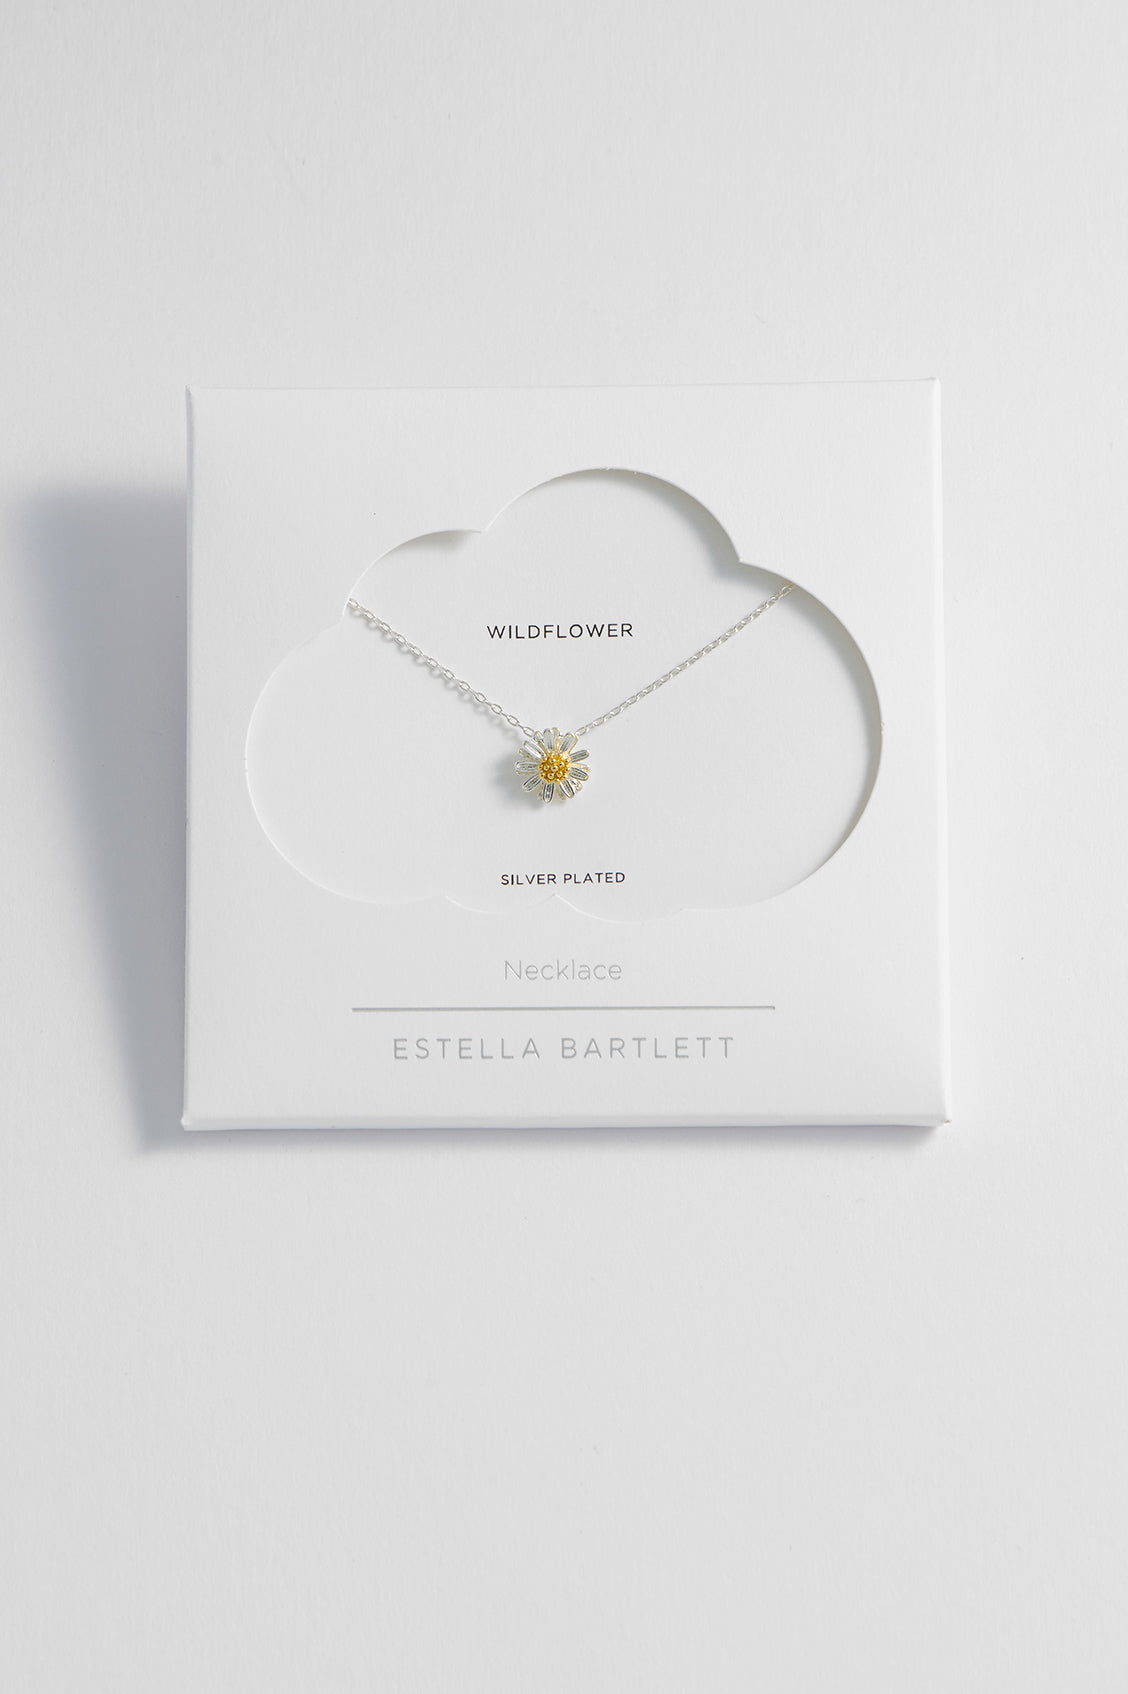 Estella Bartlett | Gold and Silver Plated Wildflower Necklace